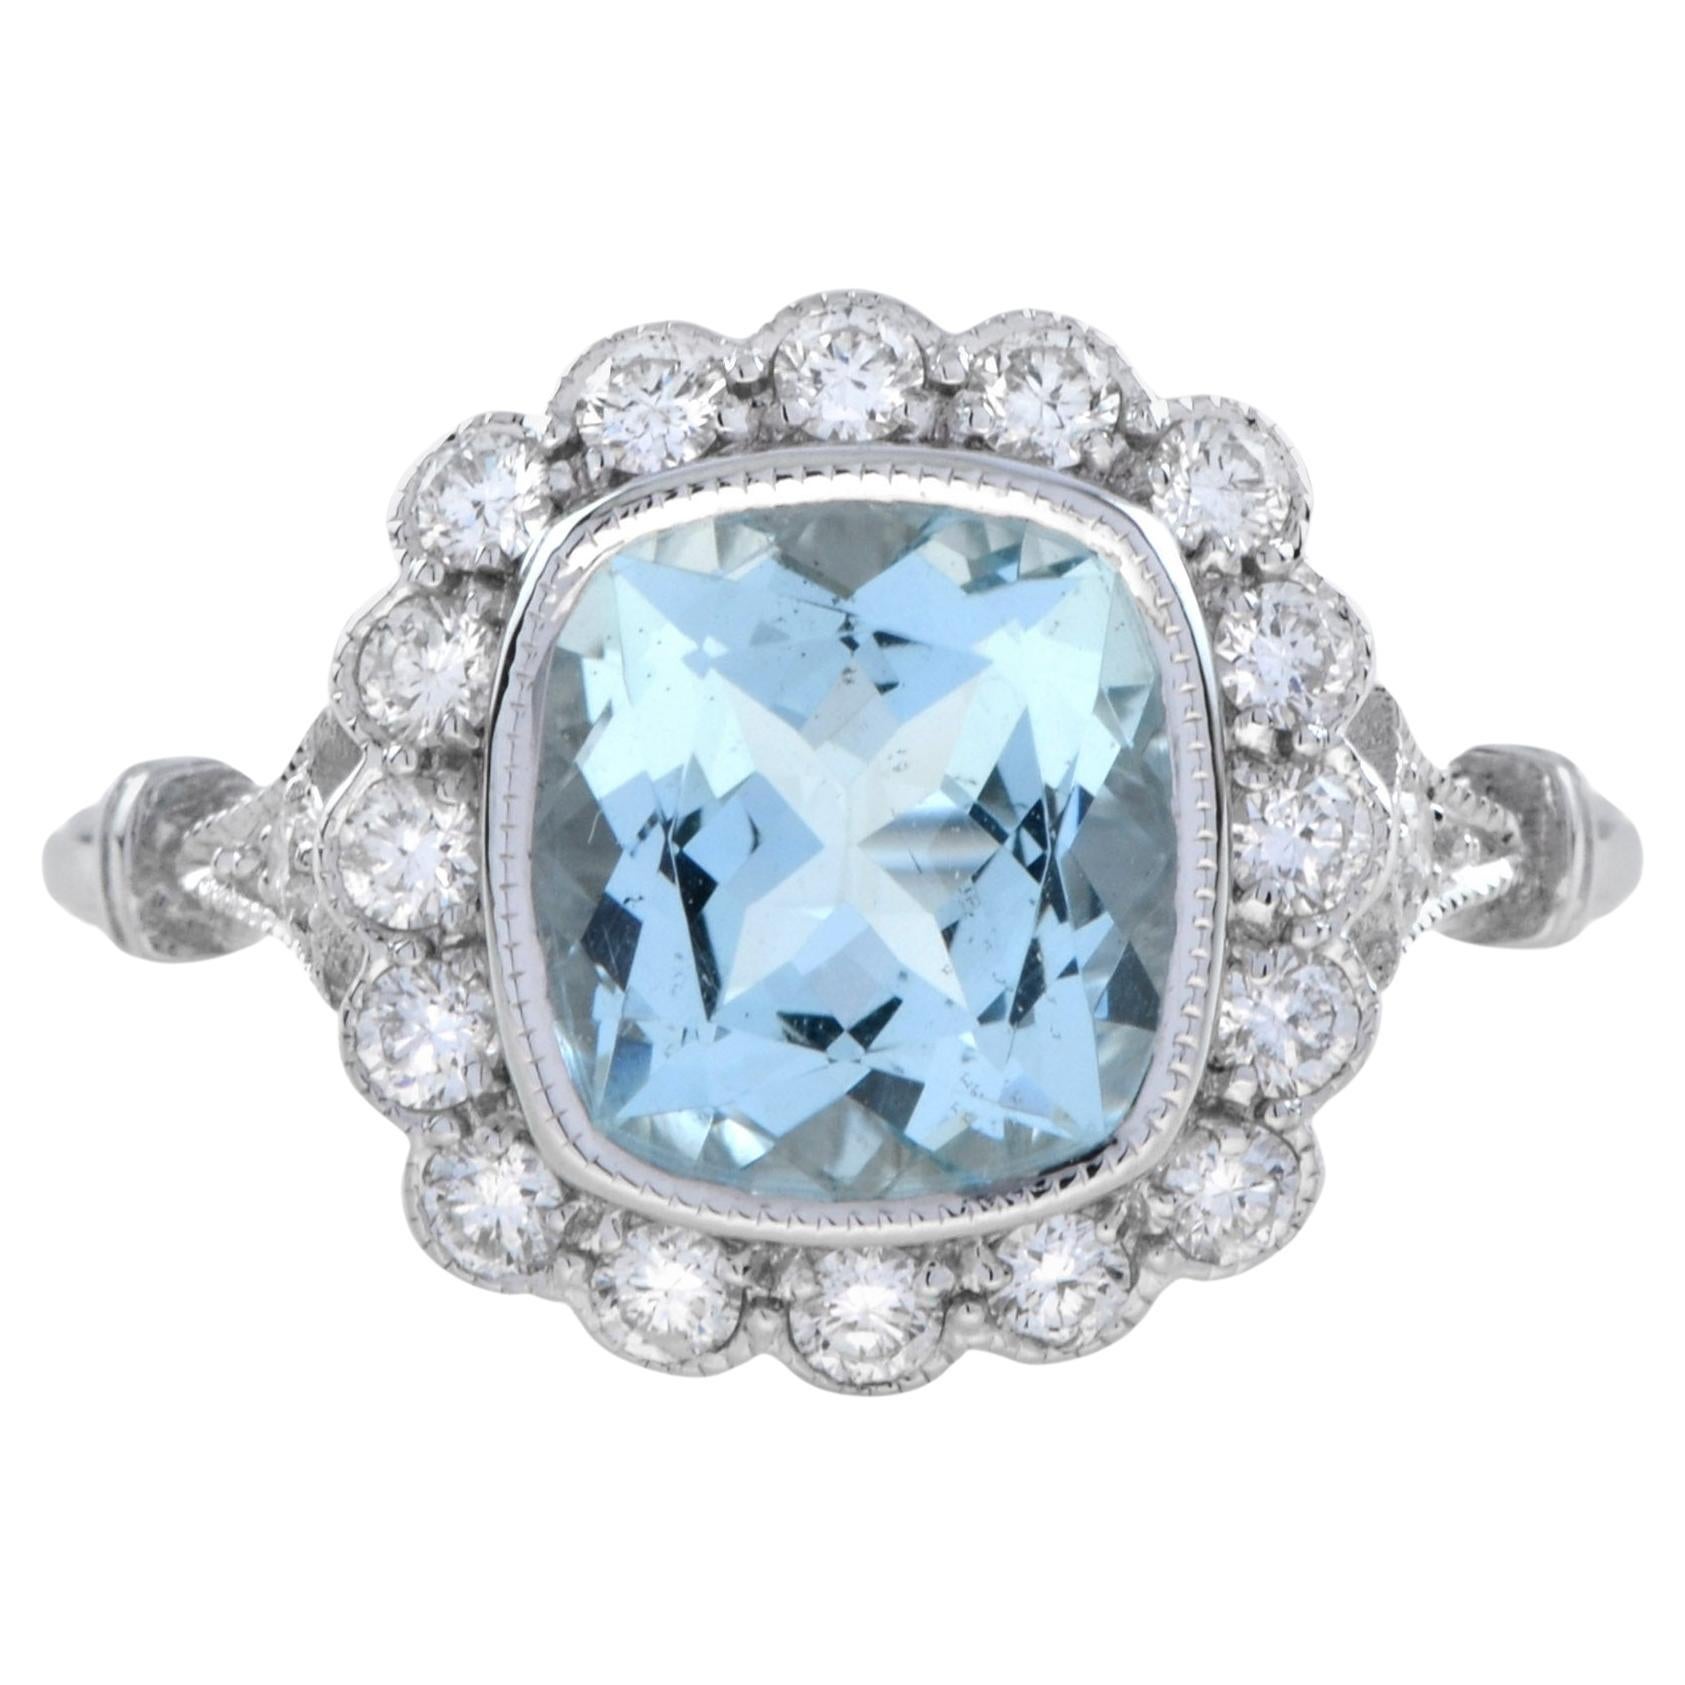 For Sale:  Cushion Aquamarine and Diamond Halo Ring in 18K White Gold